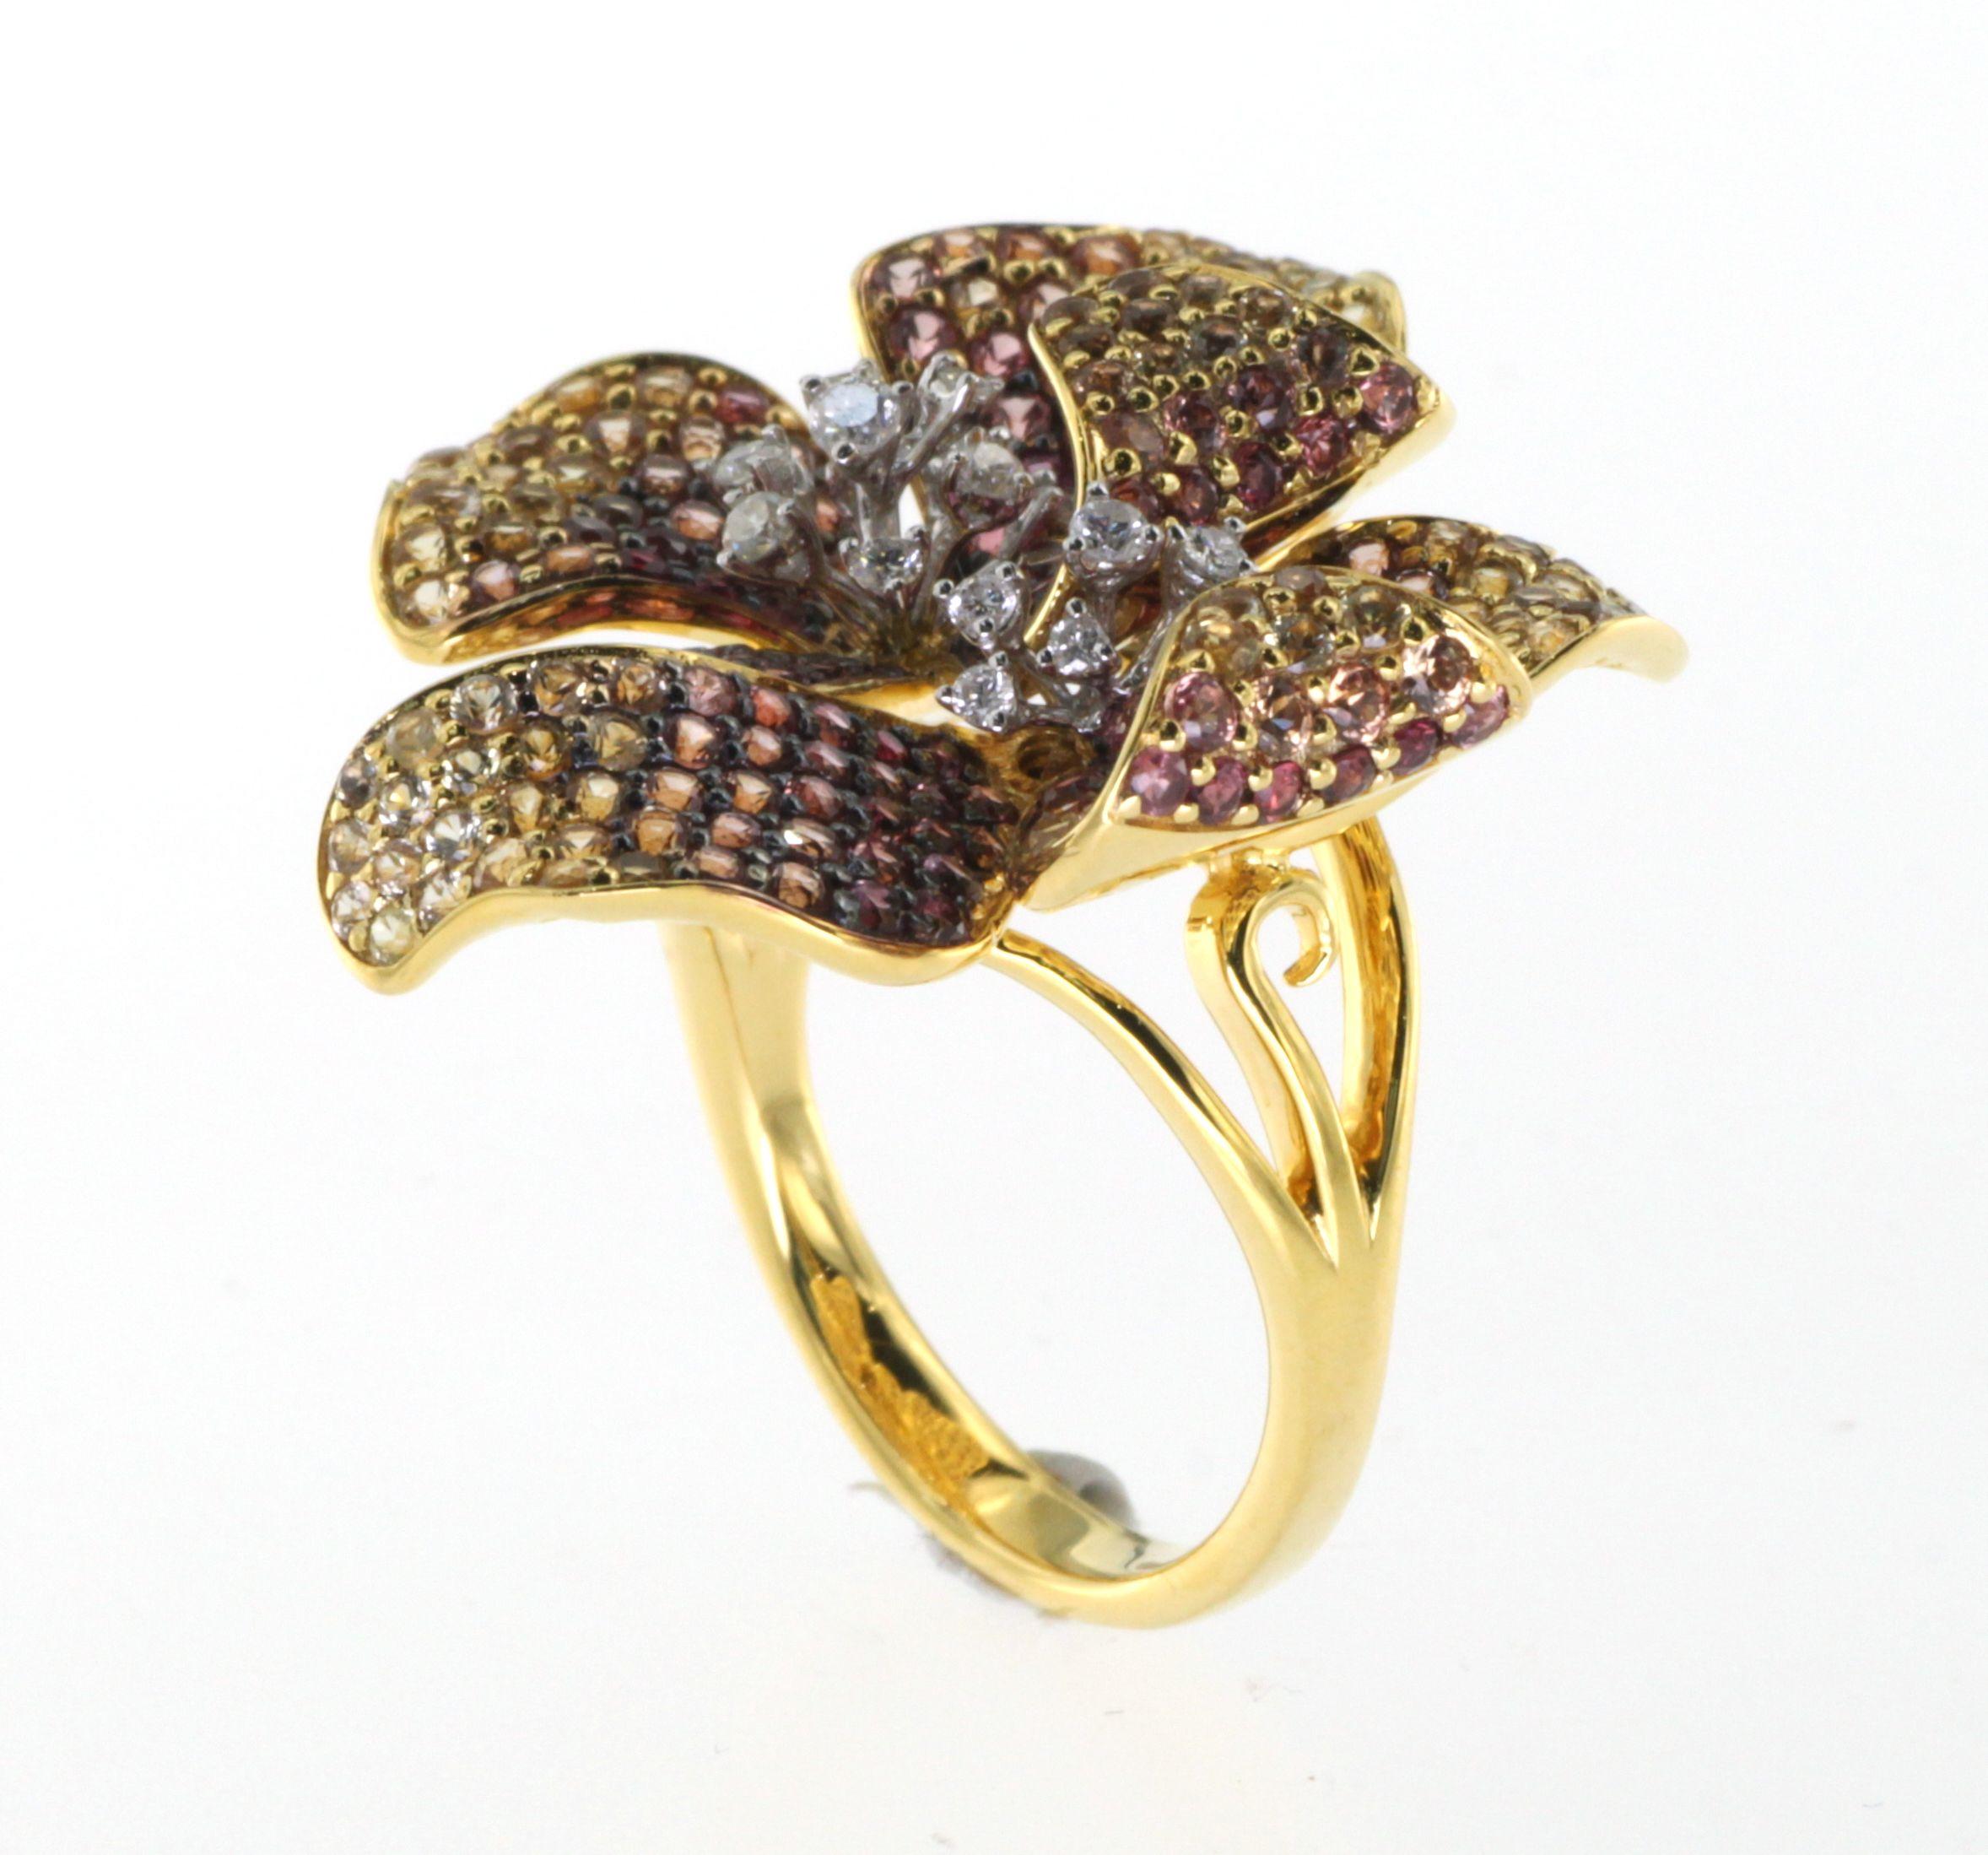 Contemporary Fancy Sapphire Flower Ring in 18K Yellow Gold SR-05267